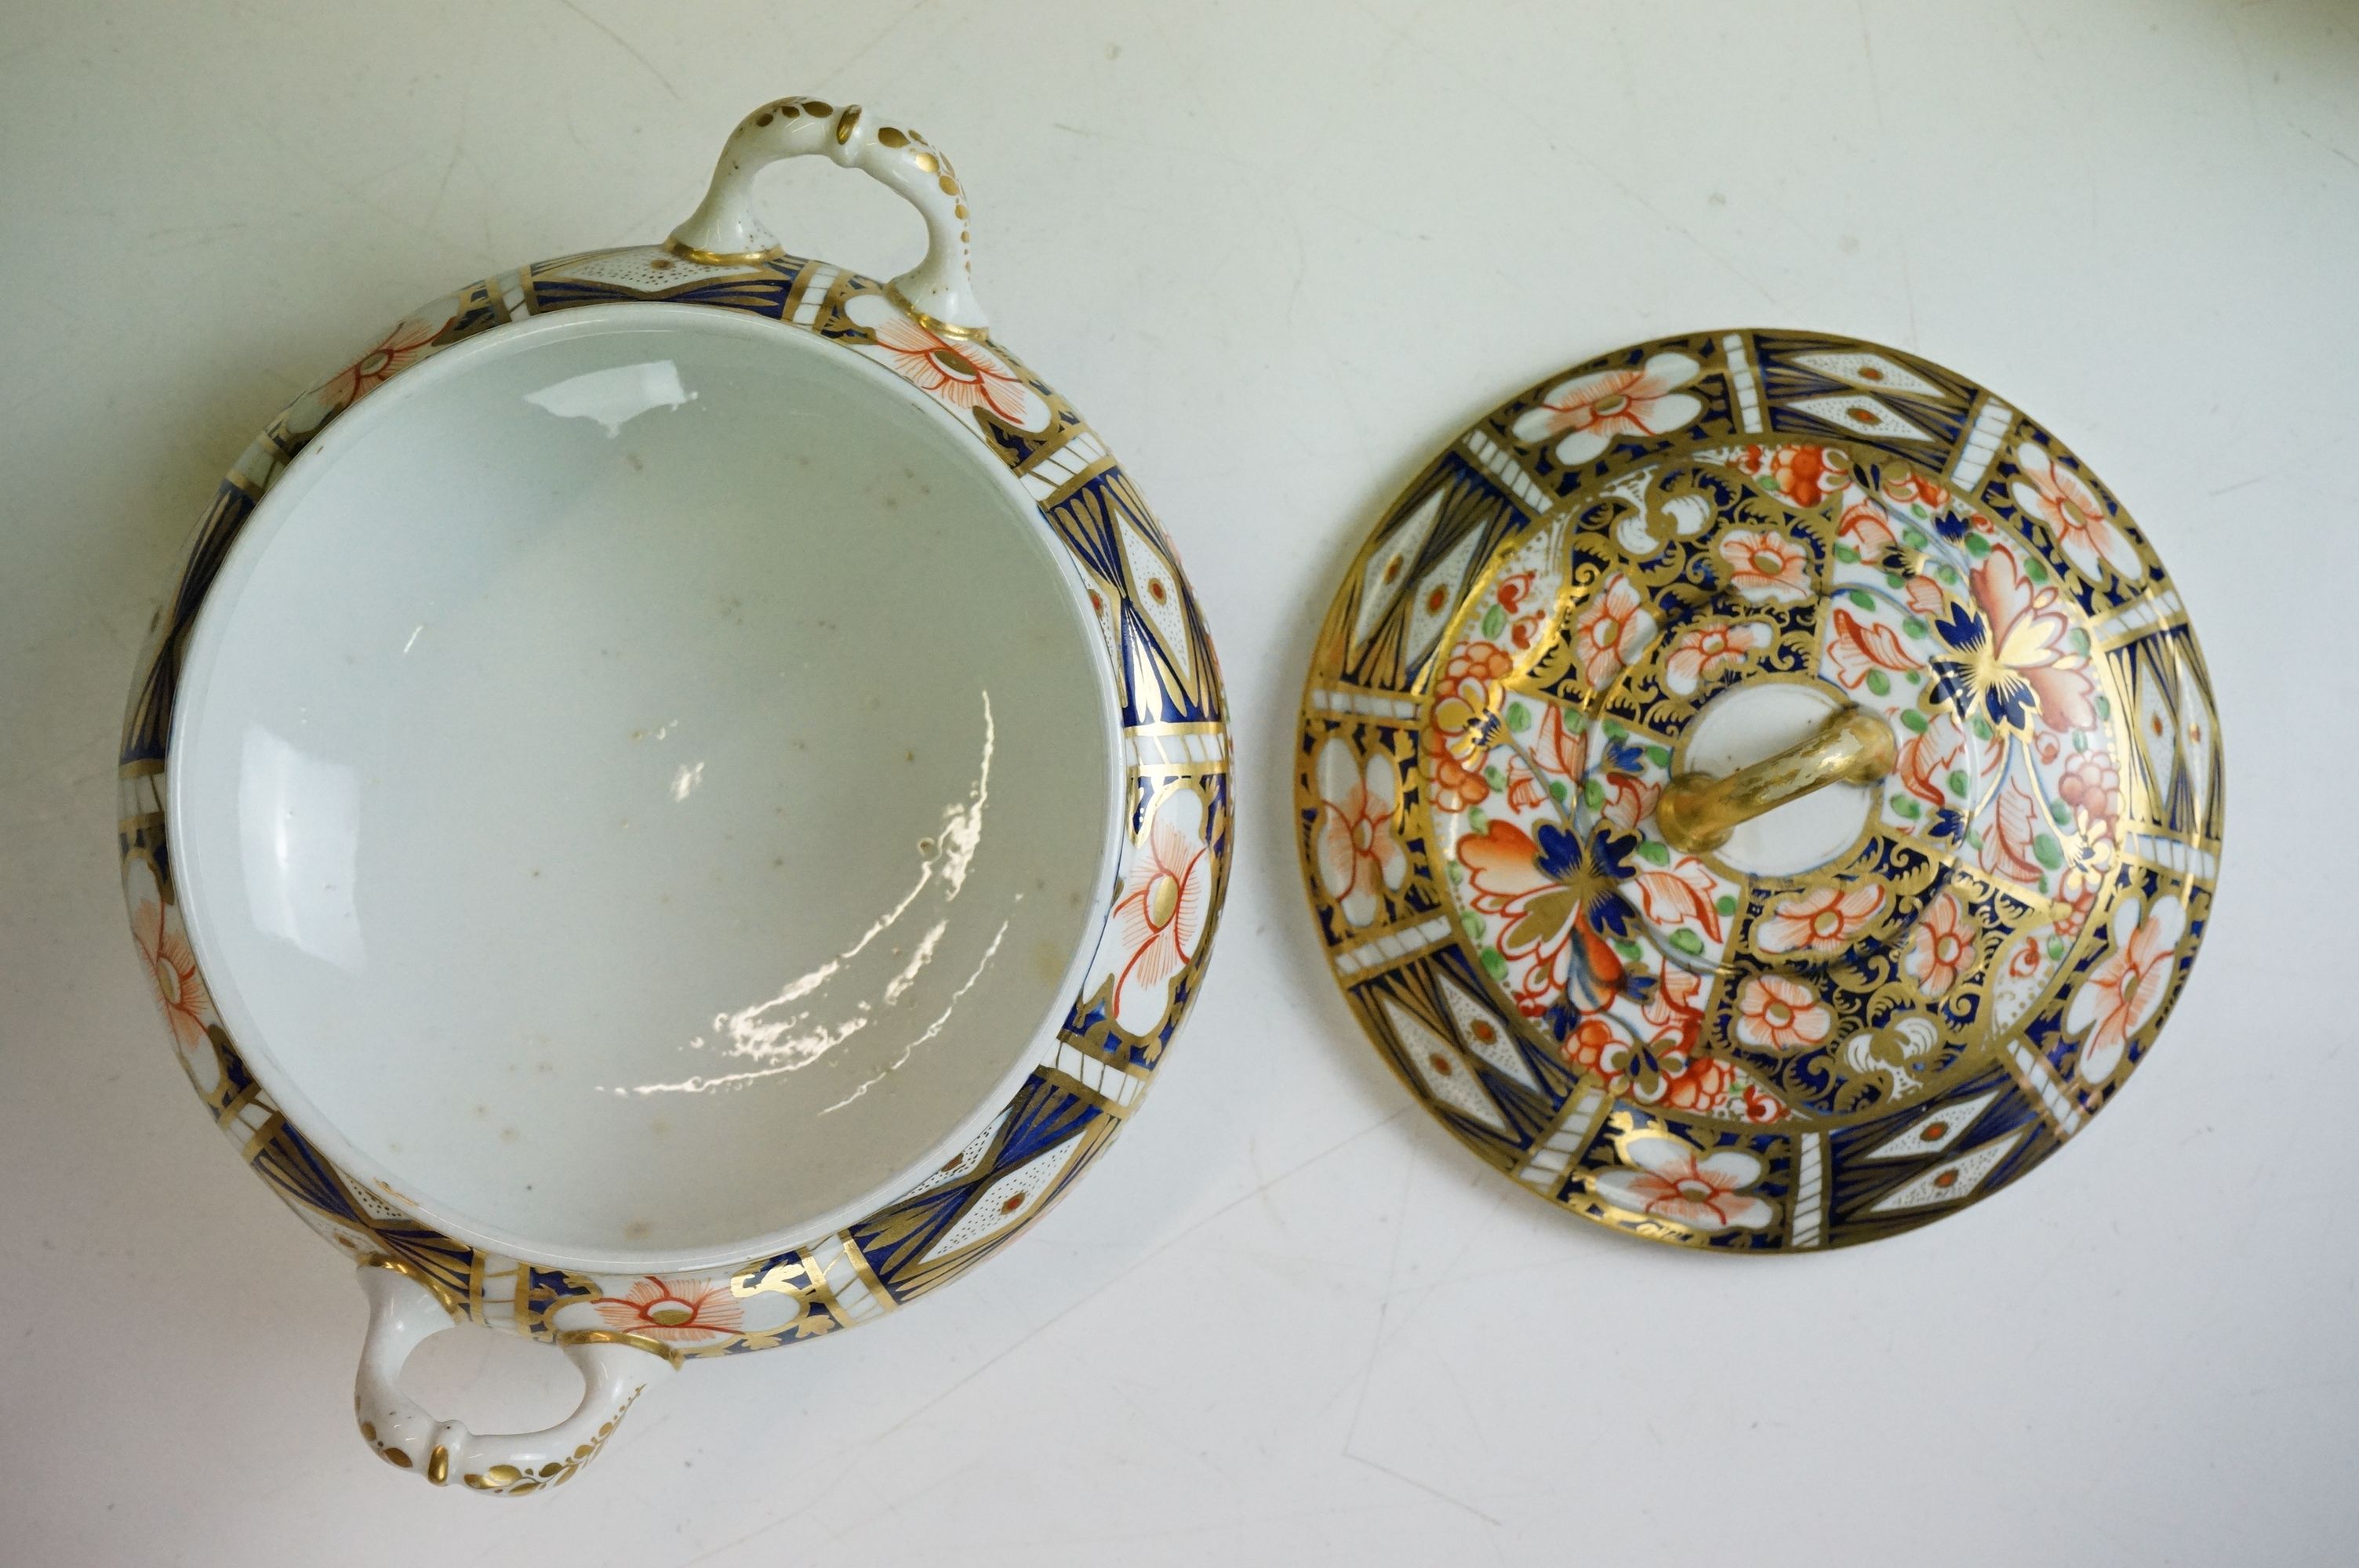 Early 19th century Crown Derby Imari pattern ceramics to include a small tureen & cover, teacups, - Image 15 of 24